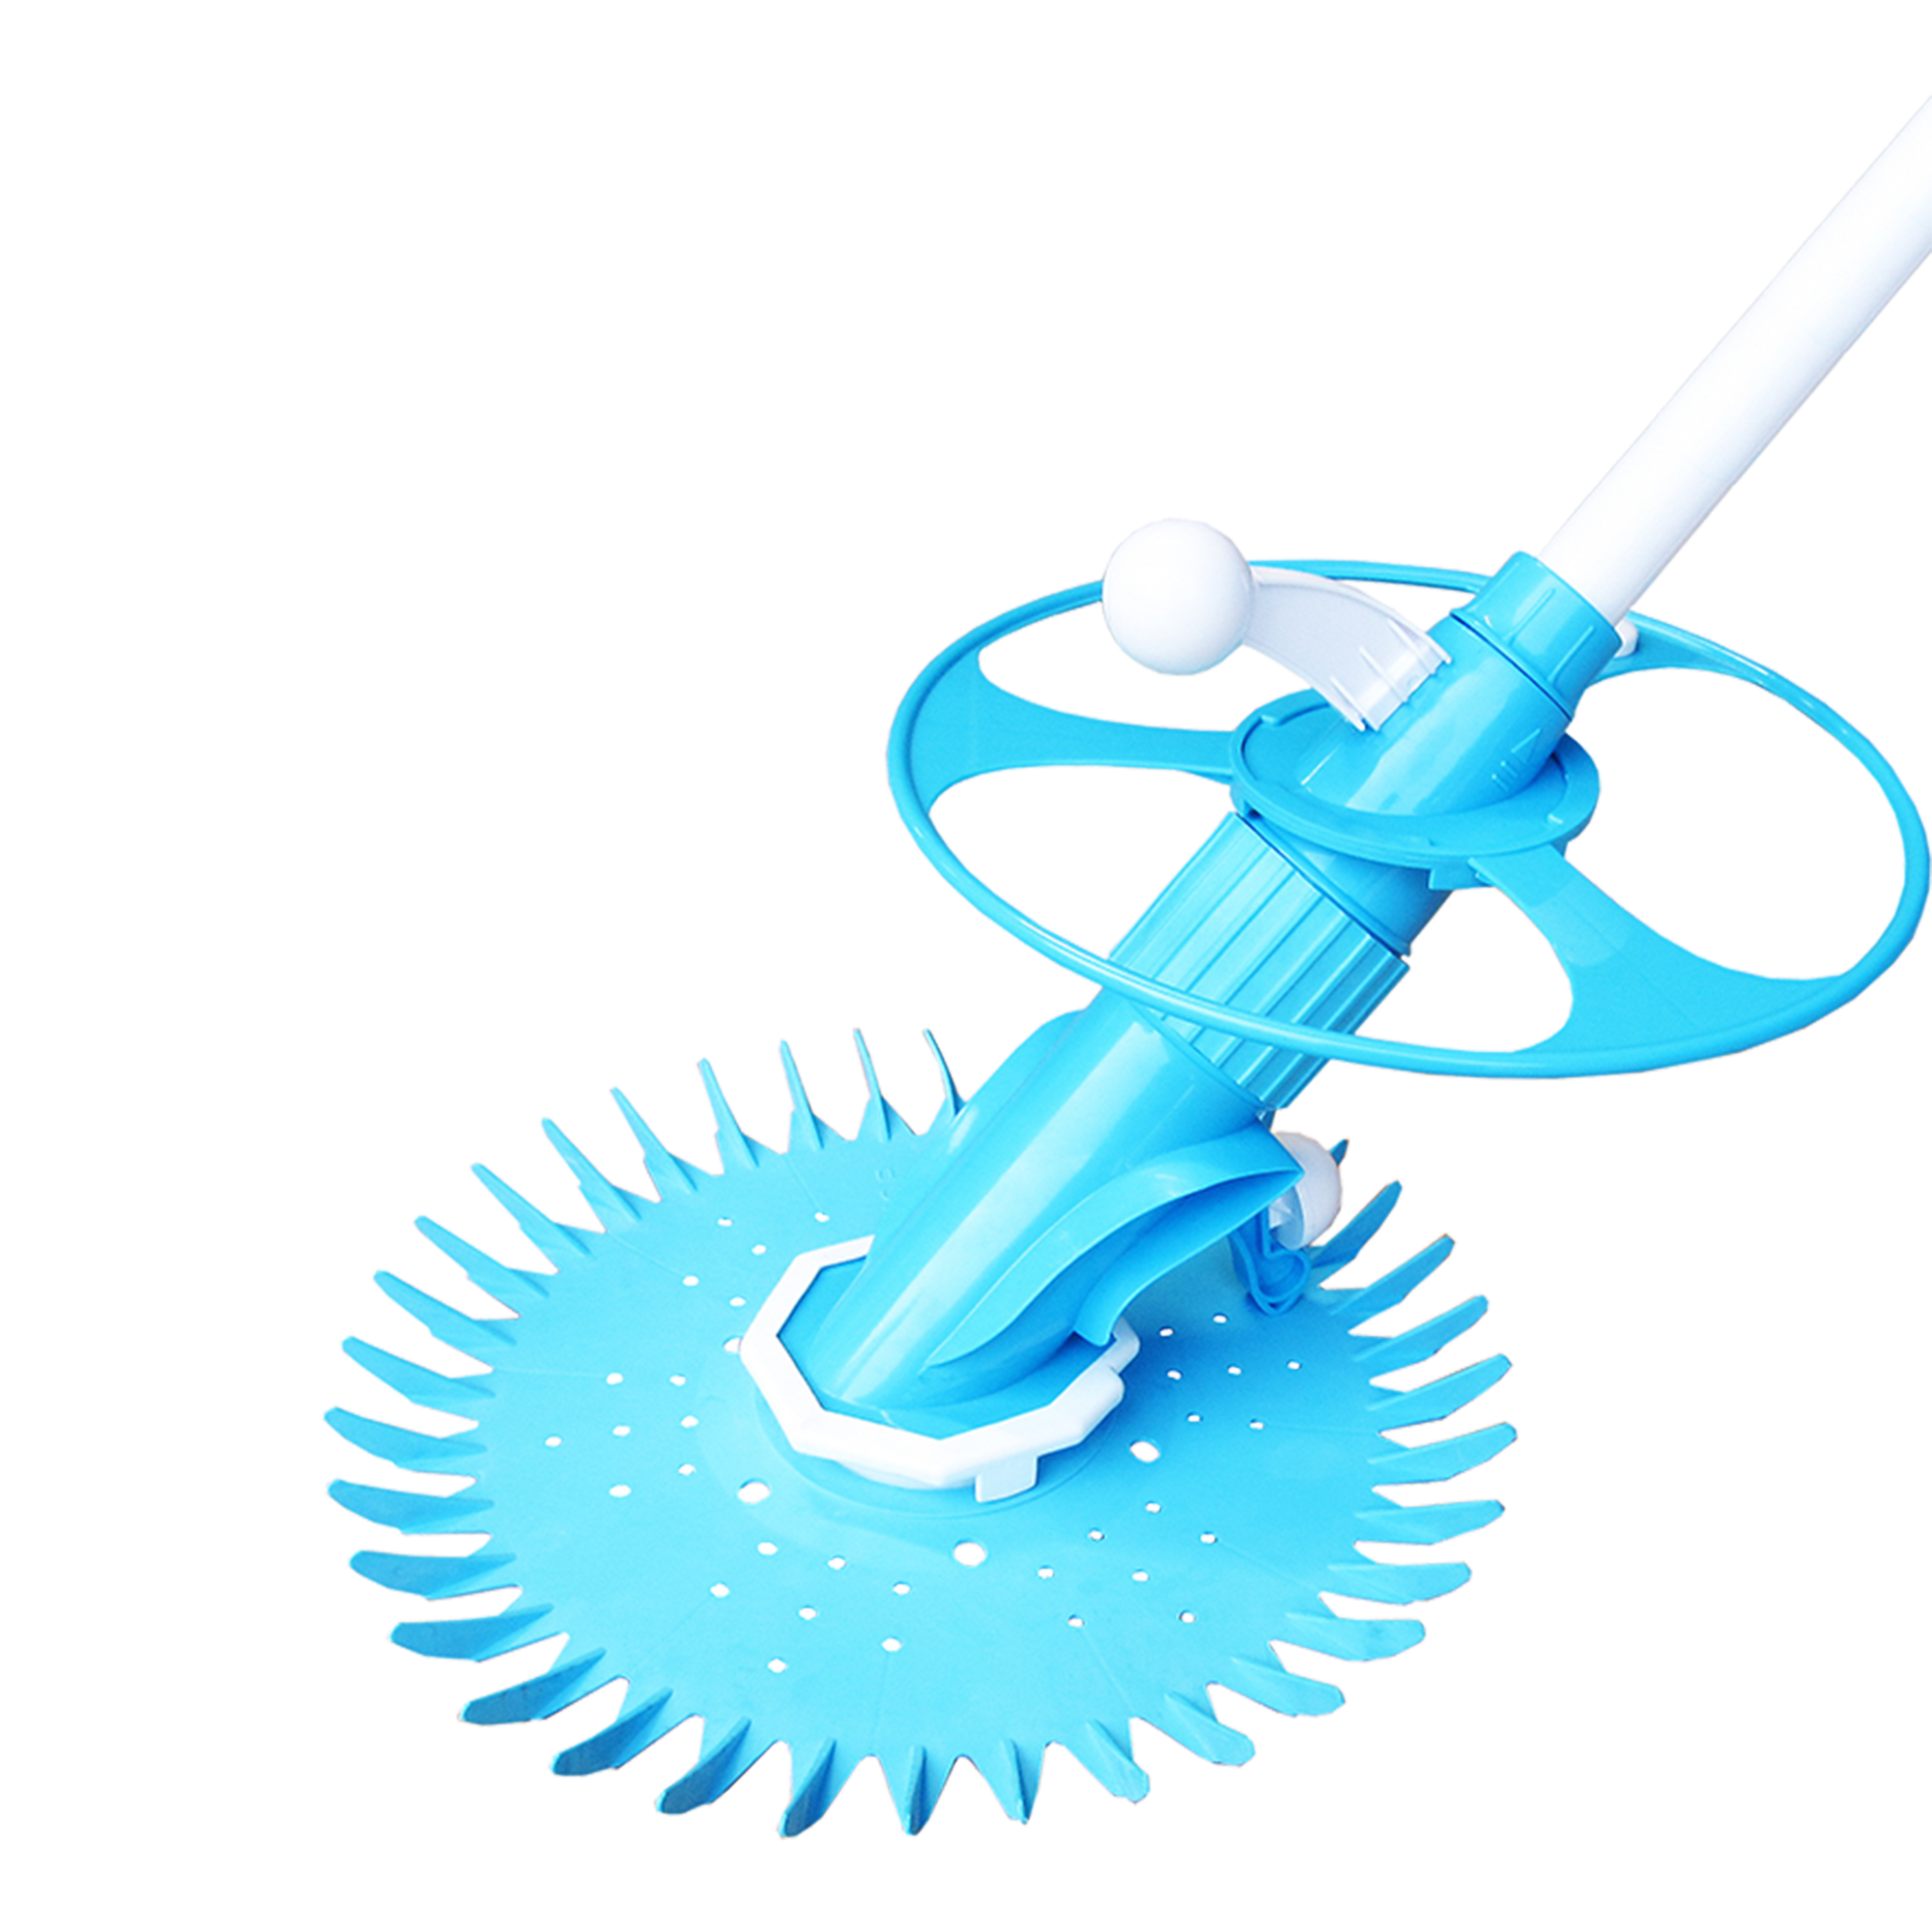 Deluxe Automatic Swimming Pool Cleaner -For Above & In-Ground